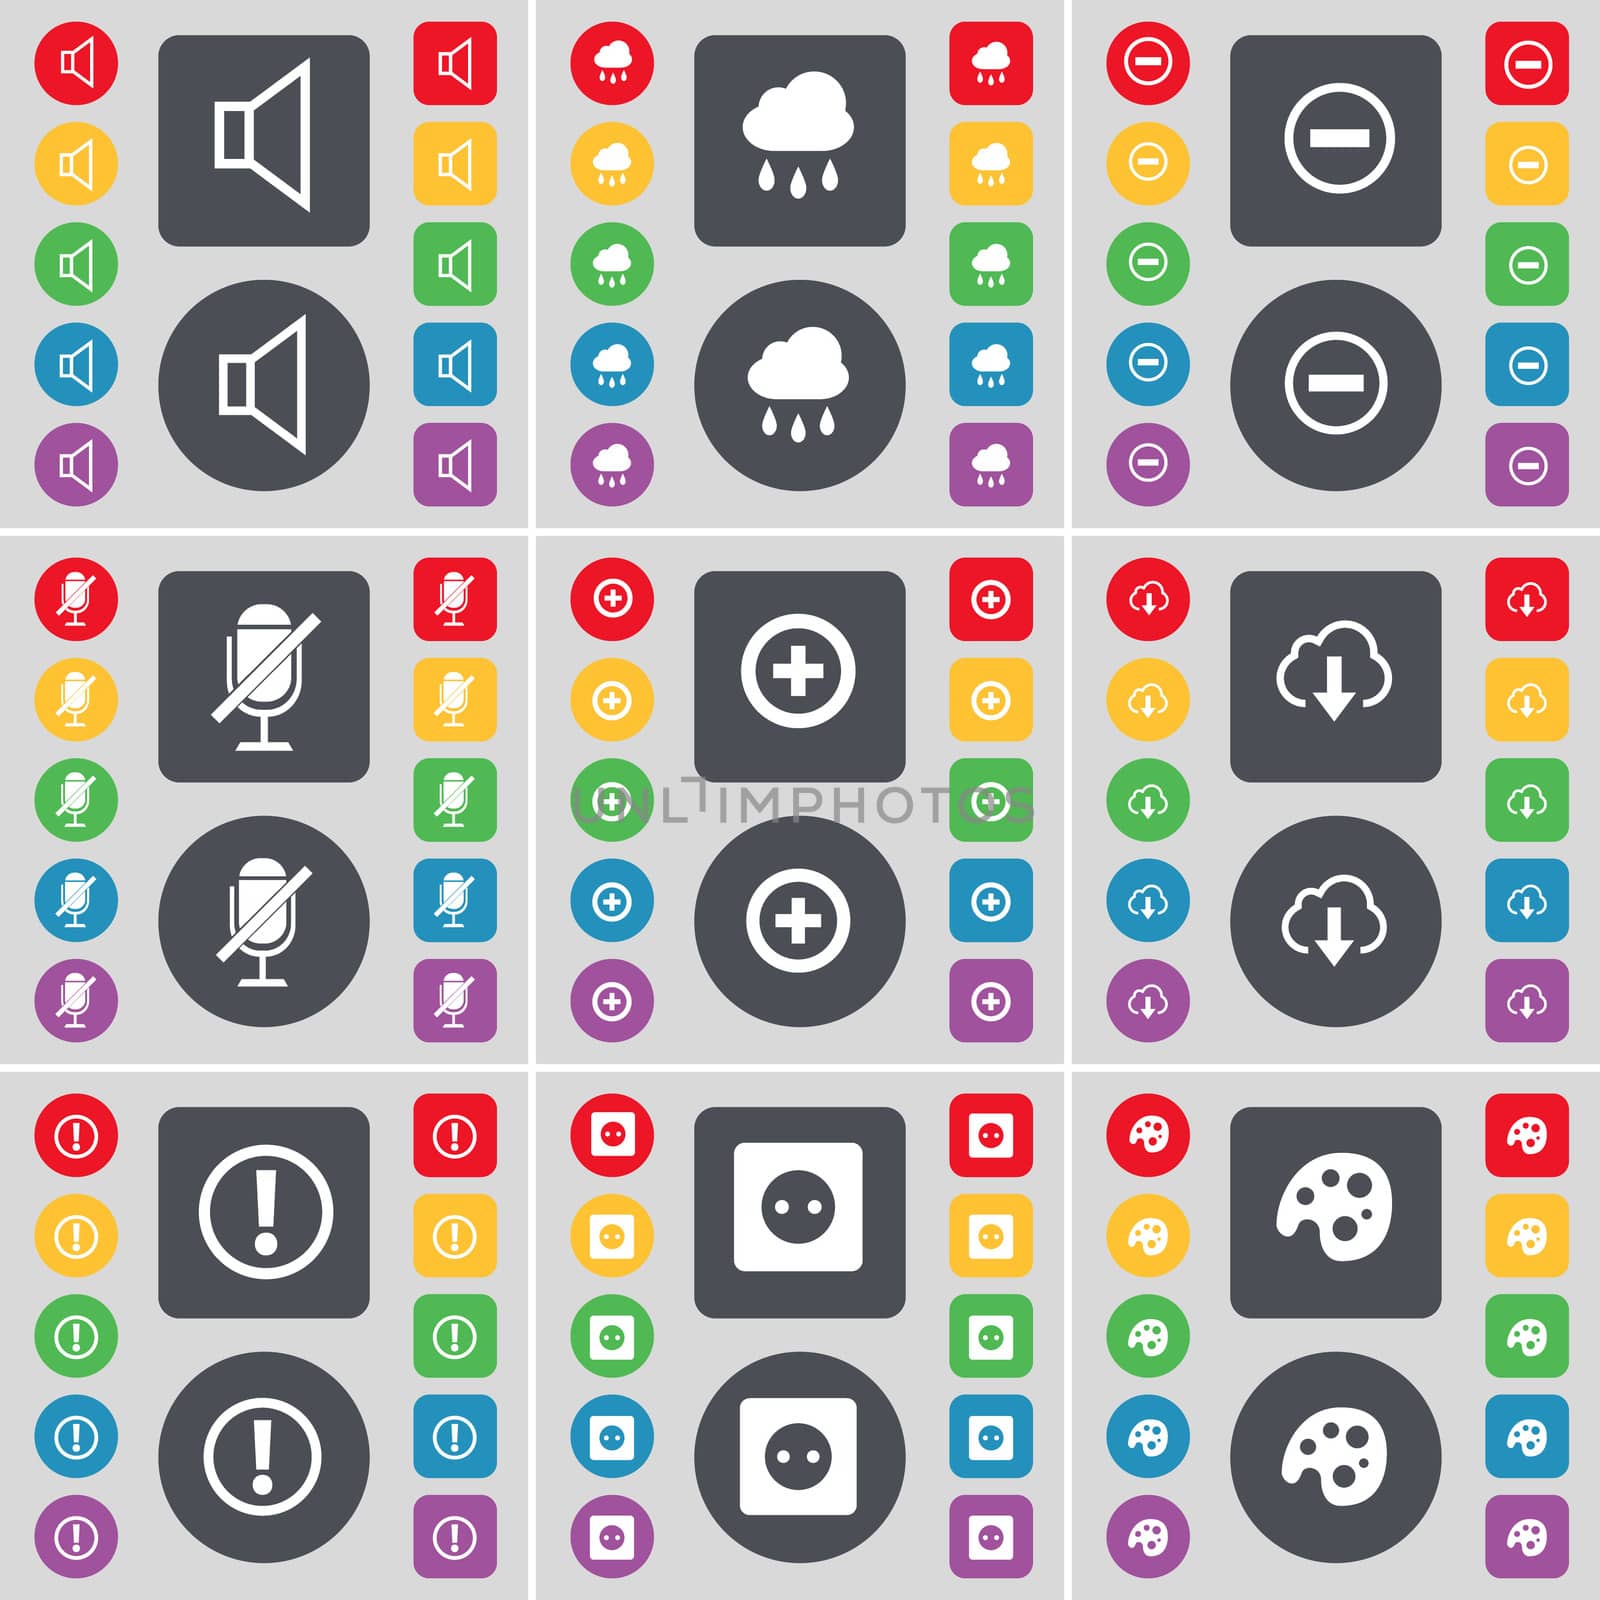 Sound, Cloud, Minus, Microphone, Plus, Cloud, Exclamation mark, Socket, Palette icon symbol. A large set of flat, colored buttons for your design.  by serhii_lohvyniuk